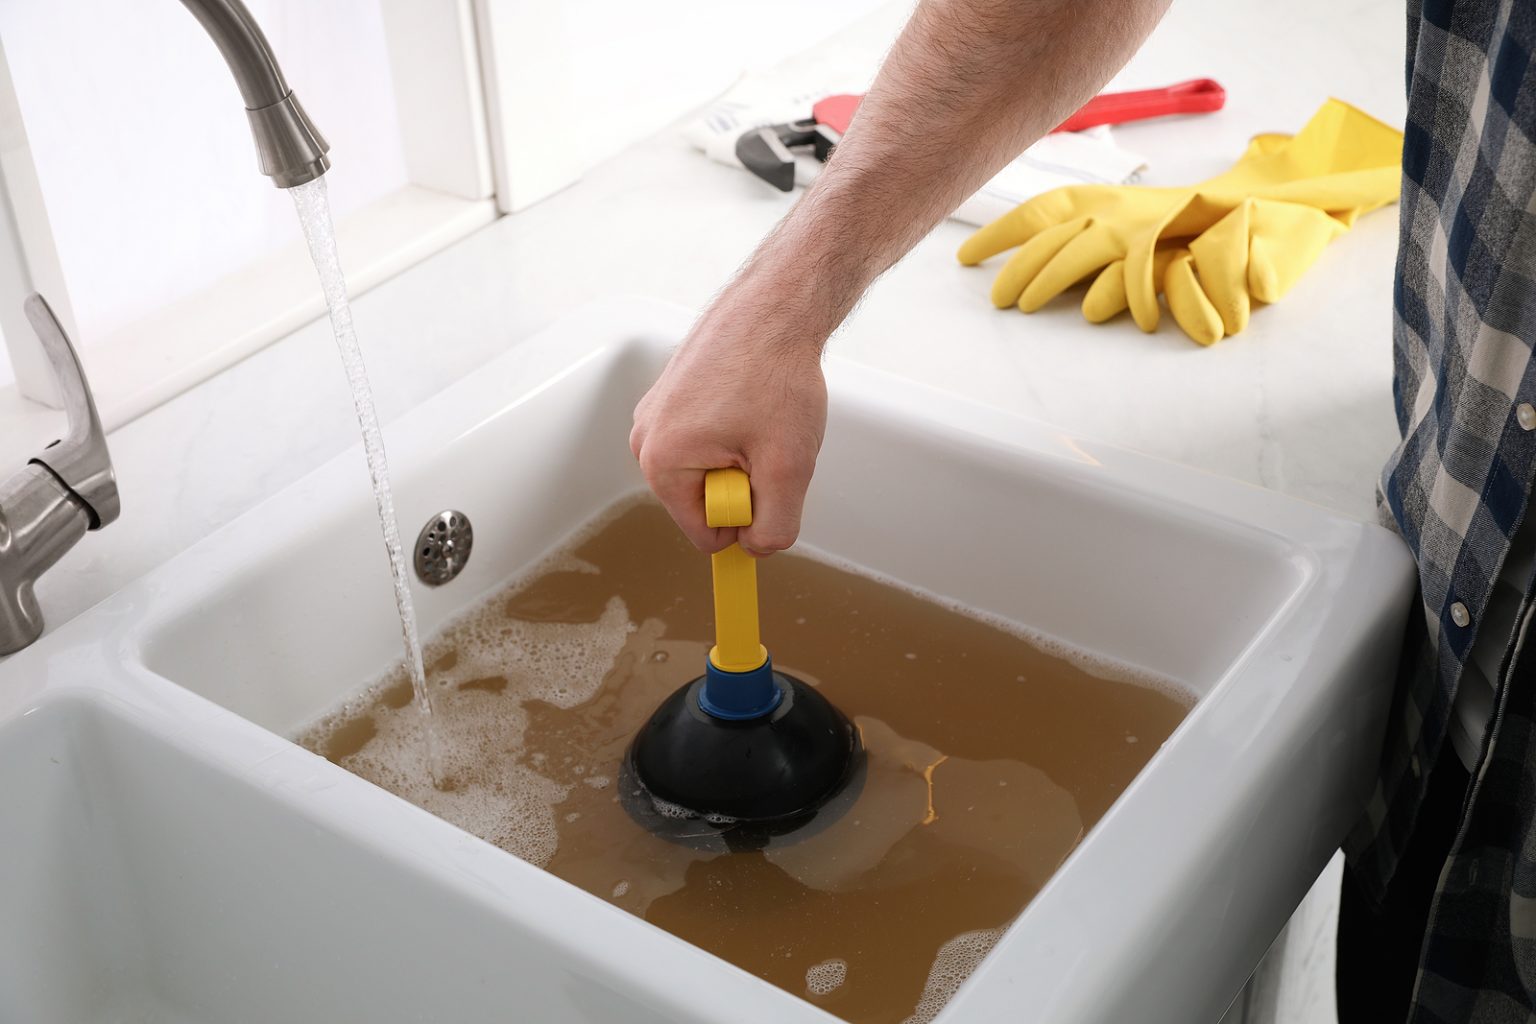 How To Use A Plunger: For Fast Plumbing Fixes